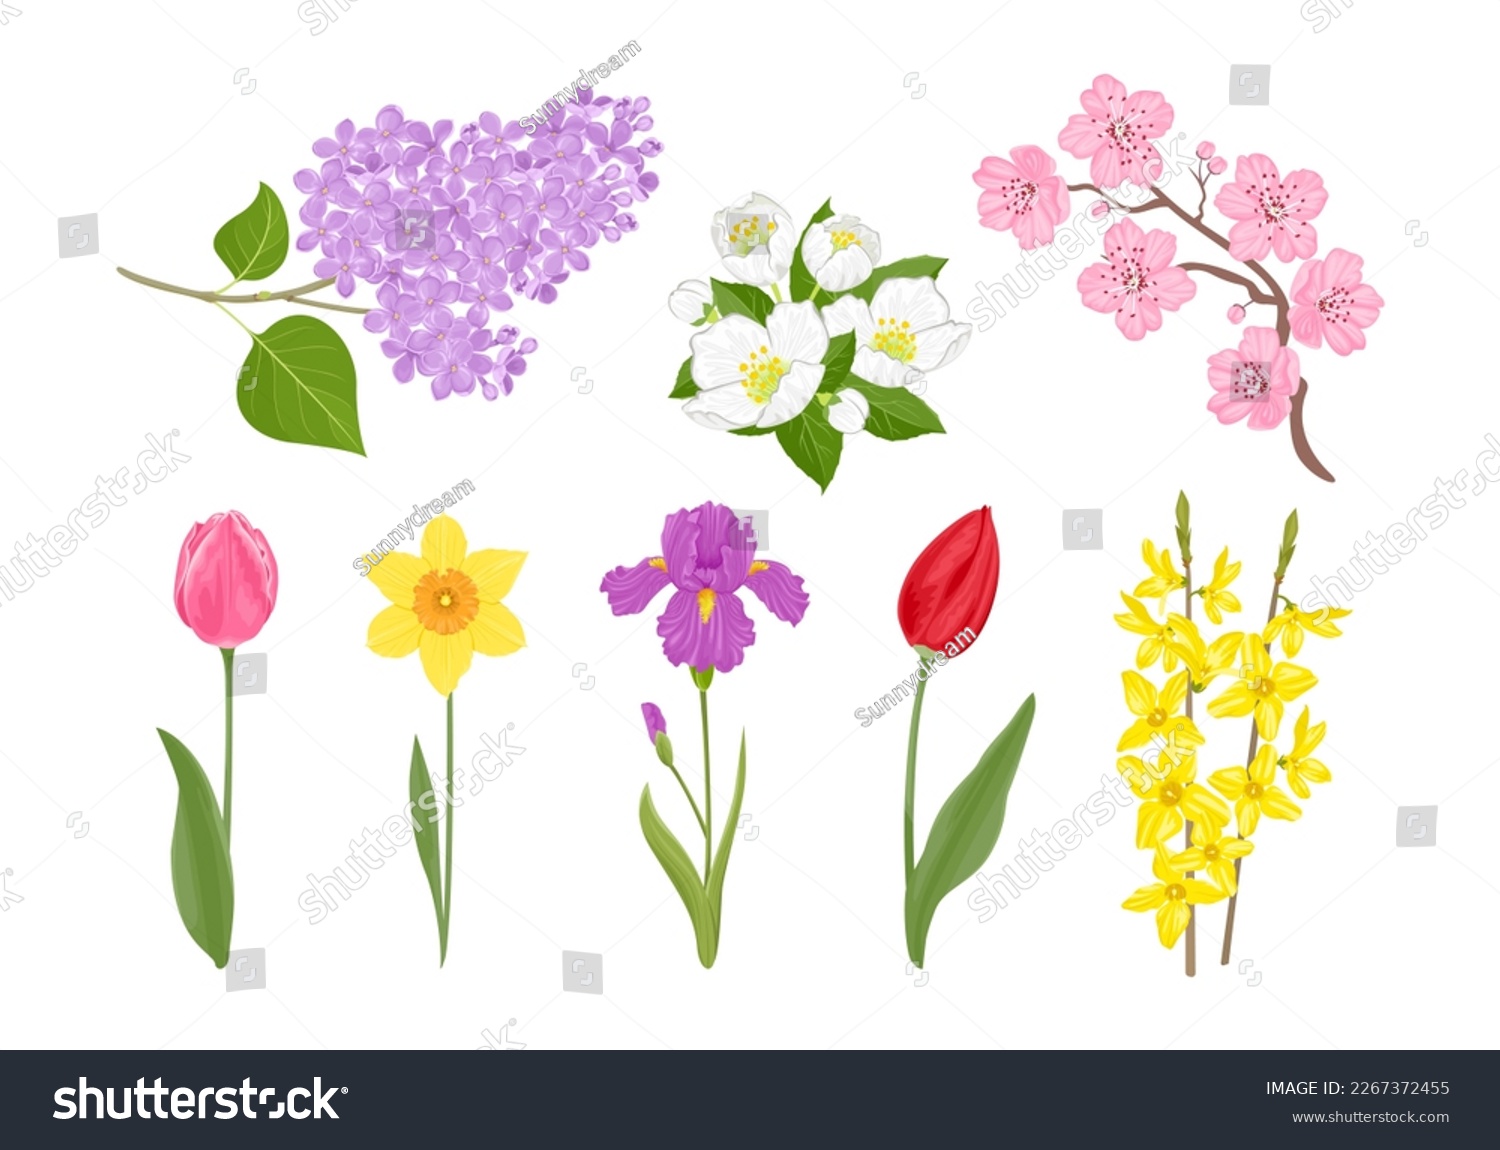 SVG of Spring flowers collection.Set of blooming plants. Vector cartoon branch of lilac, cherry blossom, forsythia or golden bells, jasmine, tulip, daffodil and iris isolated on white. Floral illustration. svg